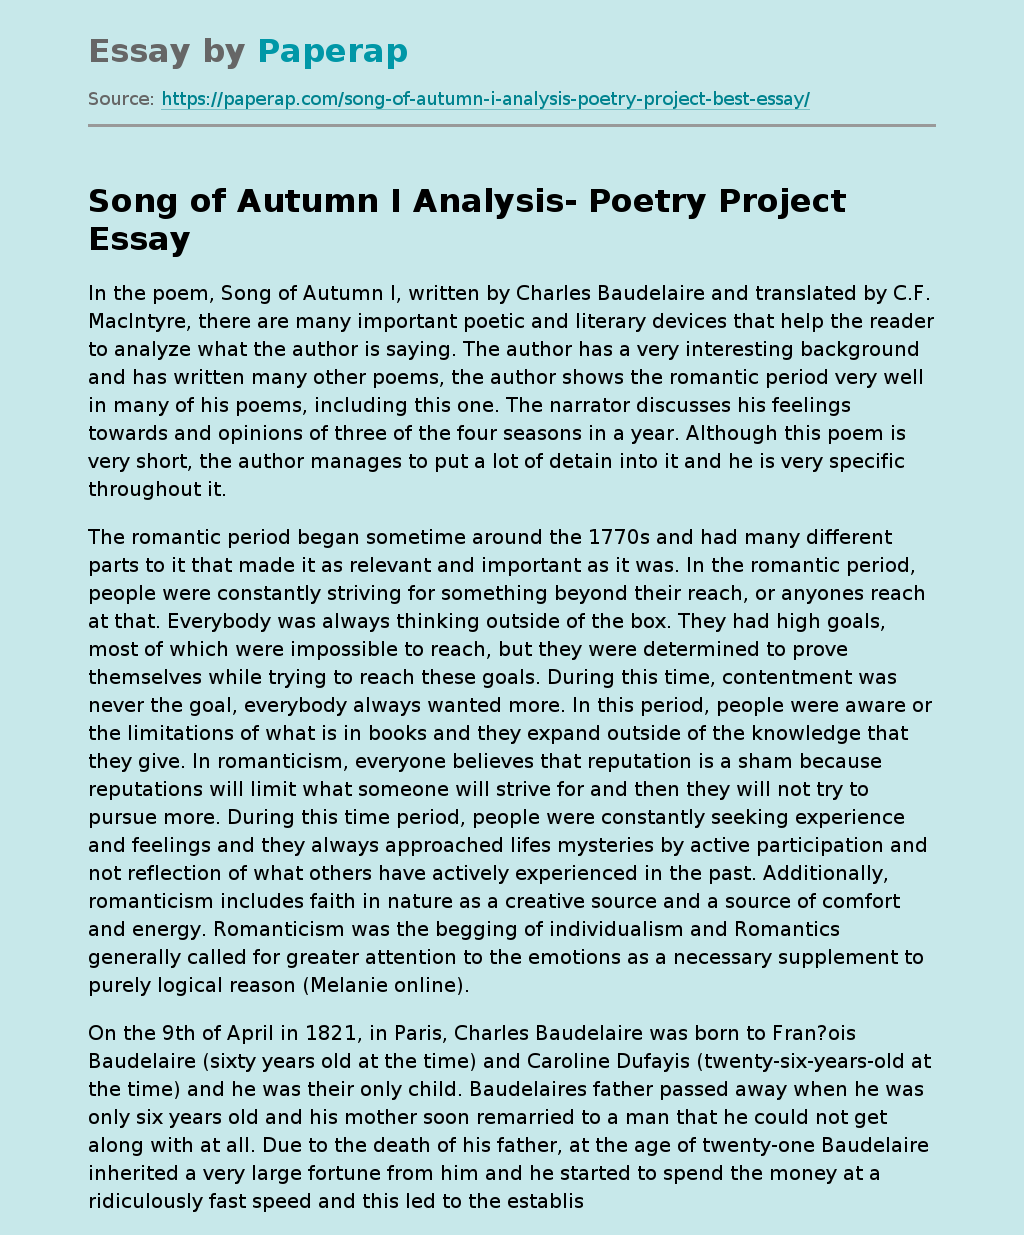 Song of Autumn I Analysis- Poetry Project